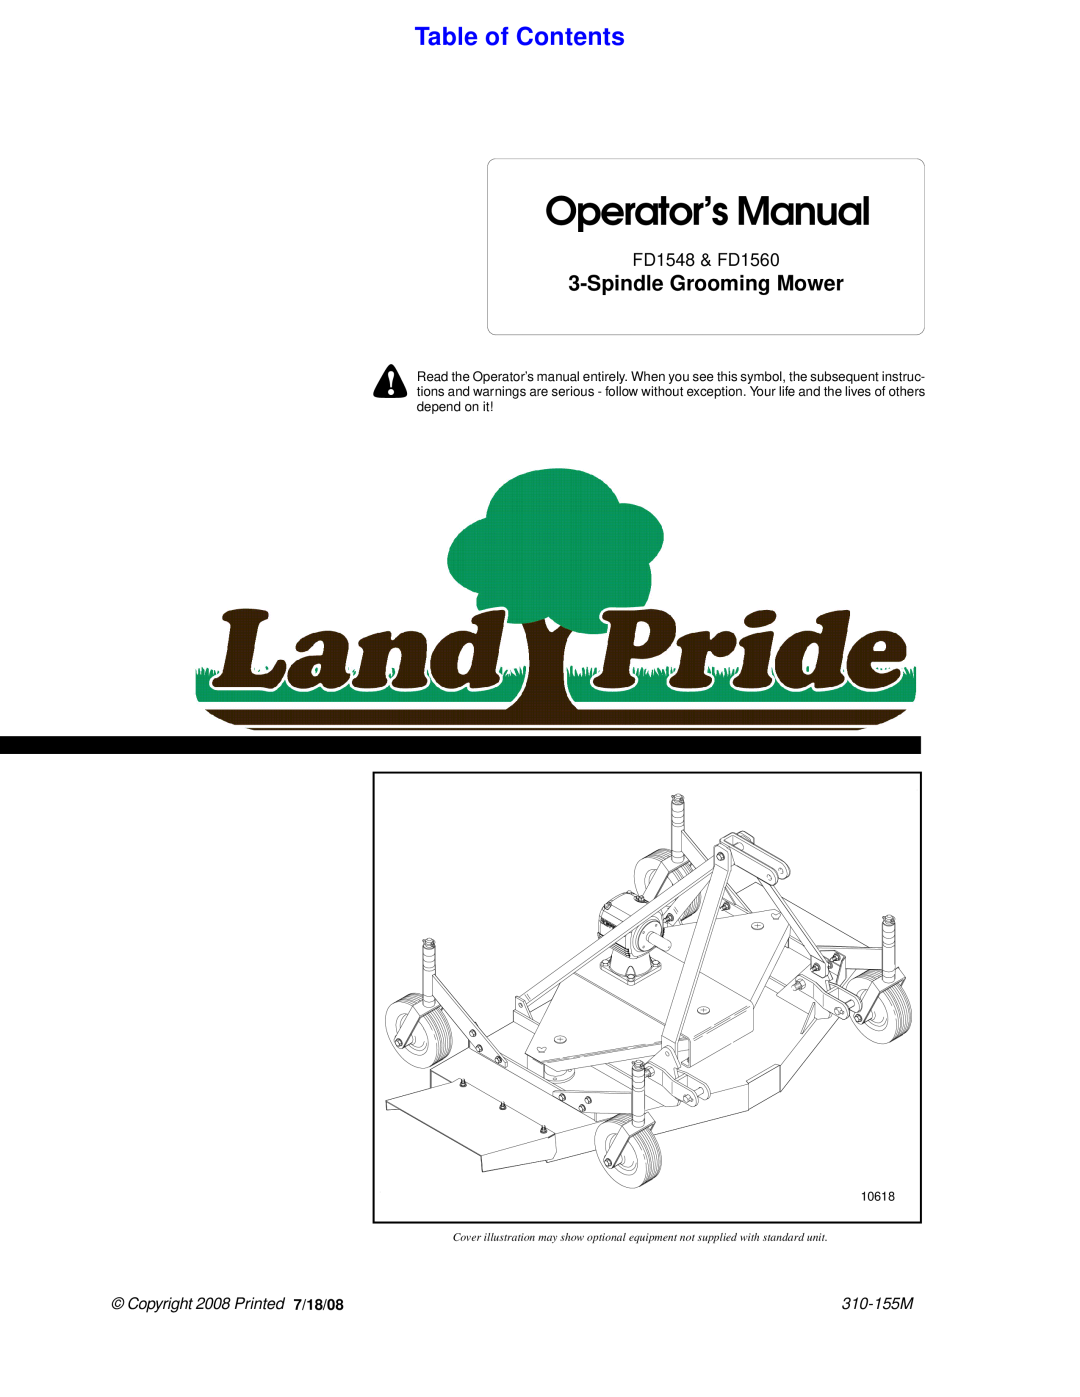 Land Pride fd1548 manual Table of Contents, Spindle Grooming Mower, Operator’s Manual, Copyright 2008 Pr inted 7/18/08 